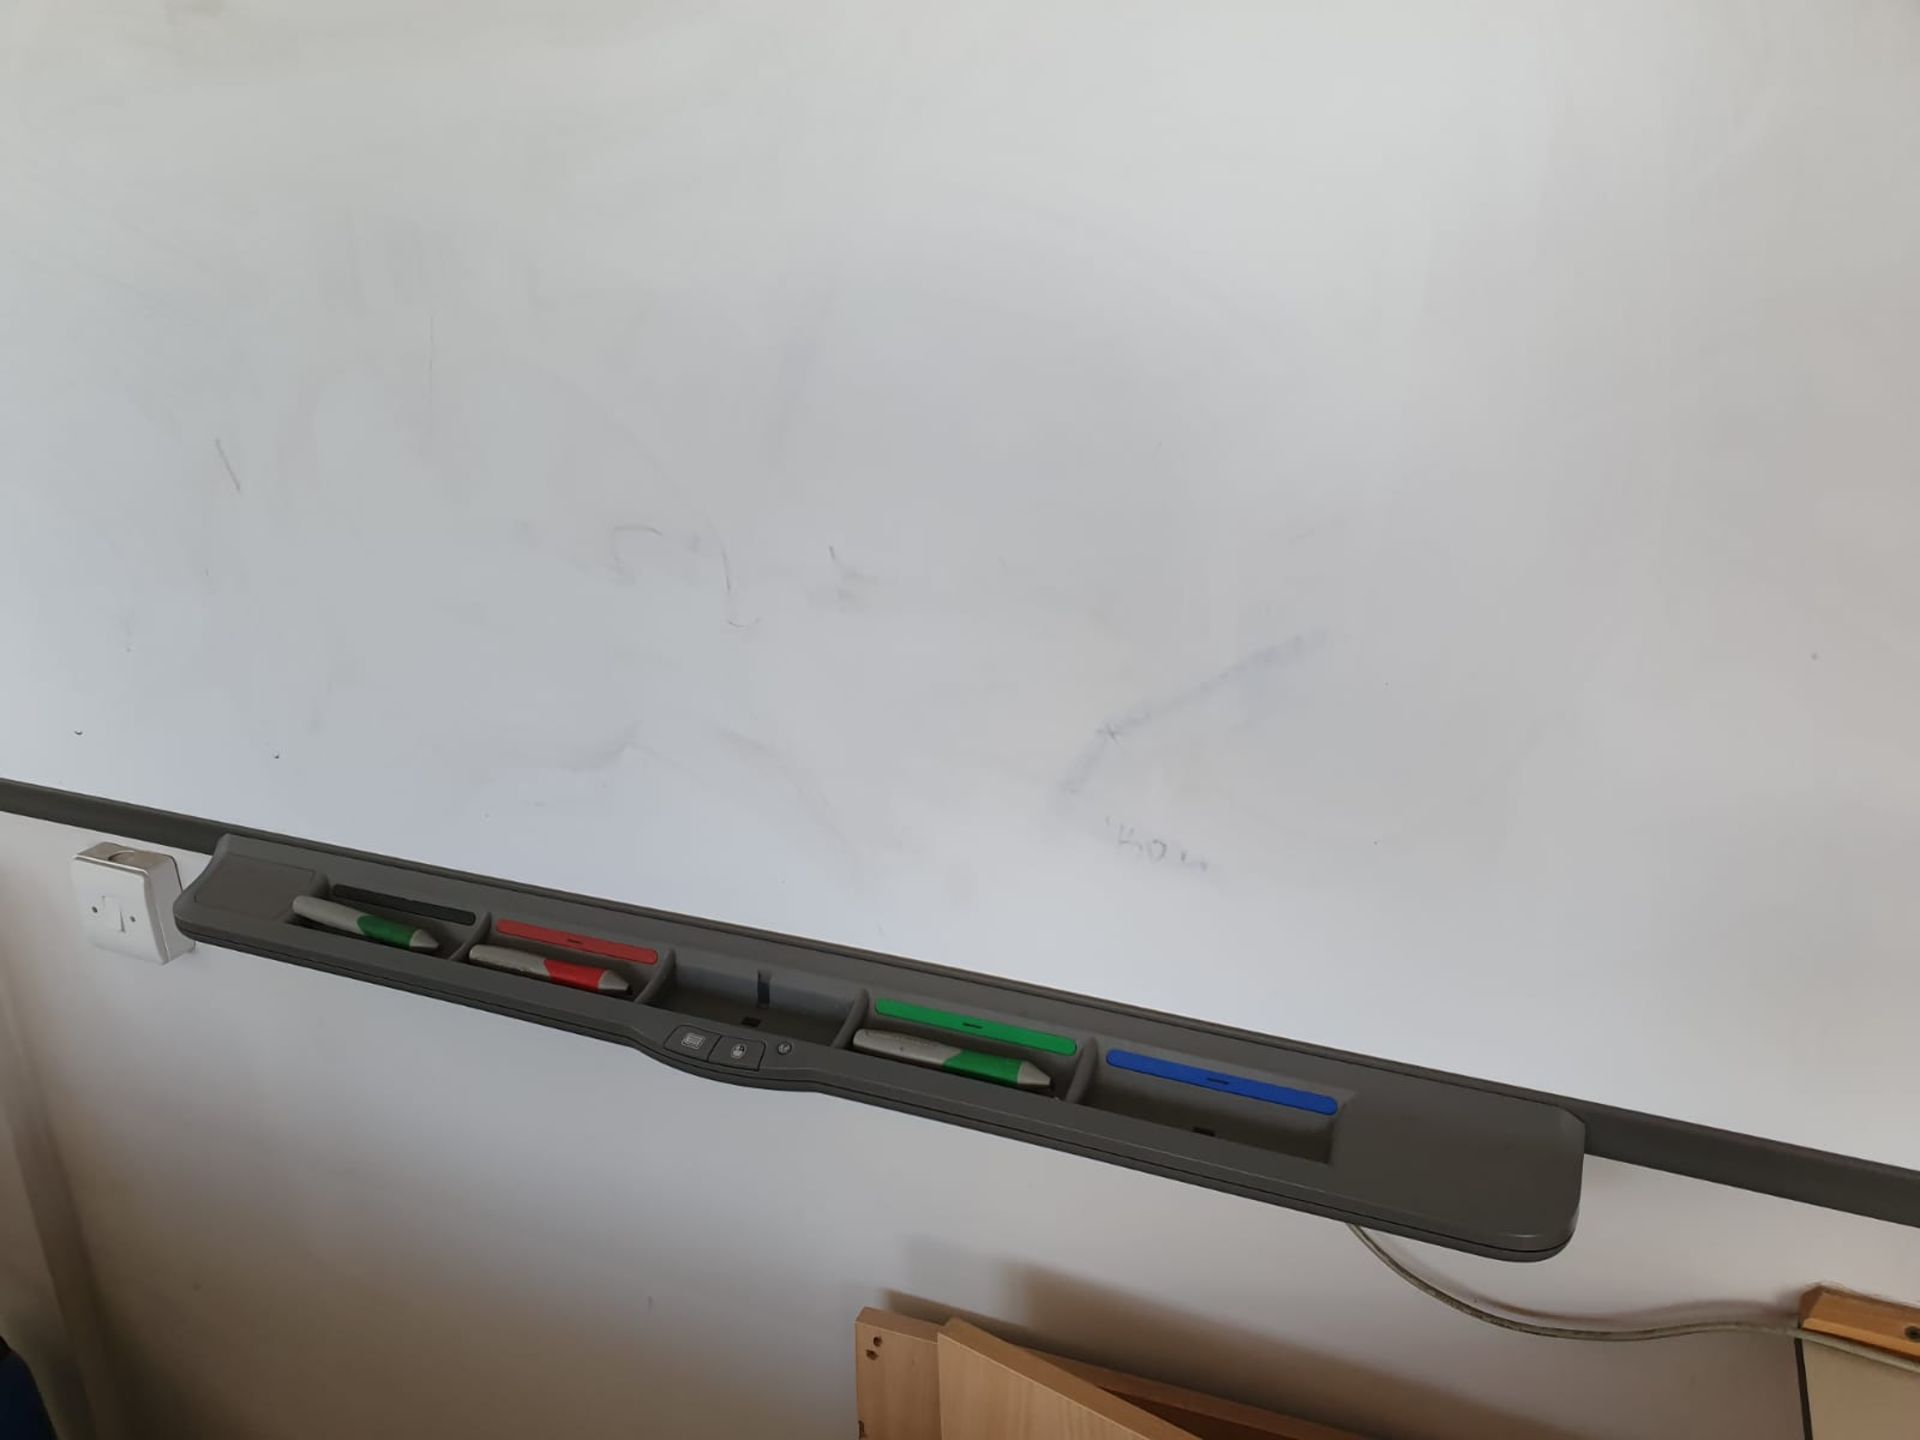 1 x Smart Interactive White Board With Speakers - Large Size -CL499 - Location: Borehamwood - Image 2 of 5